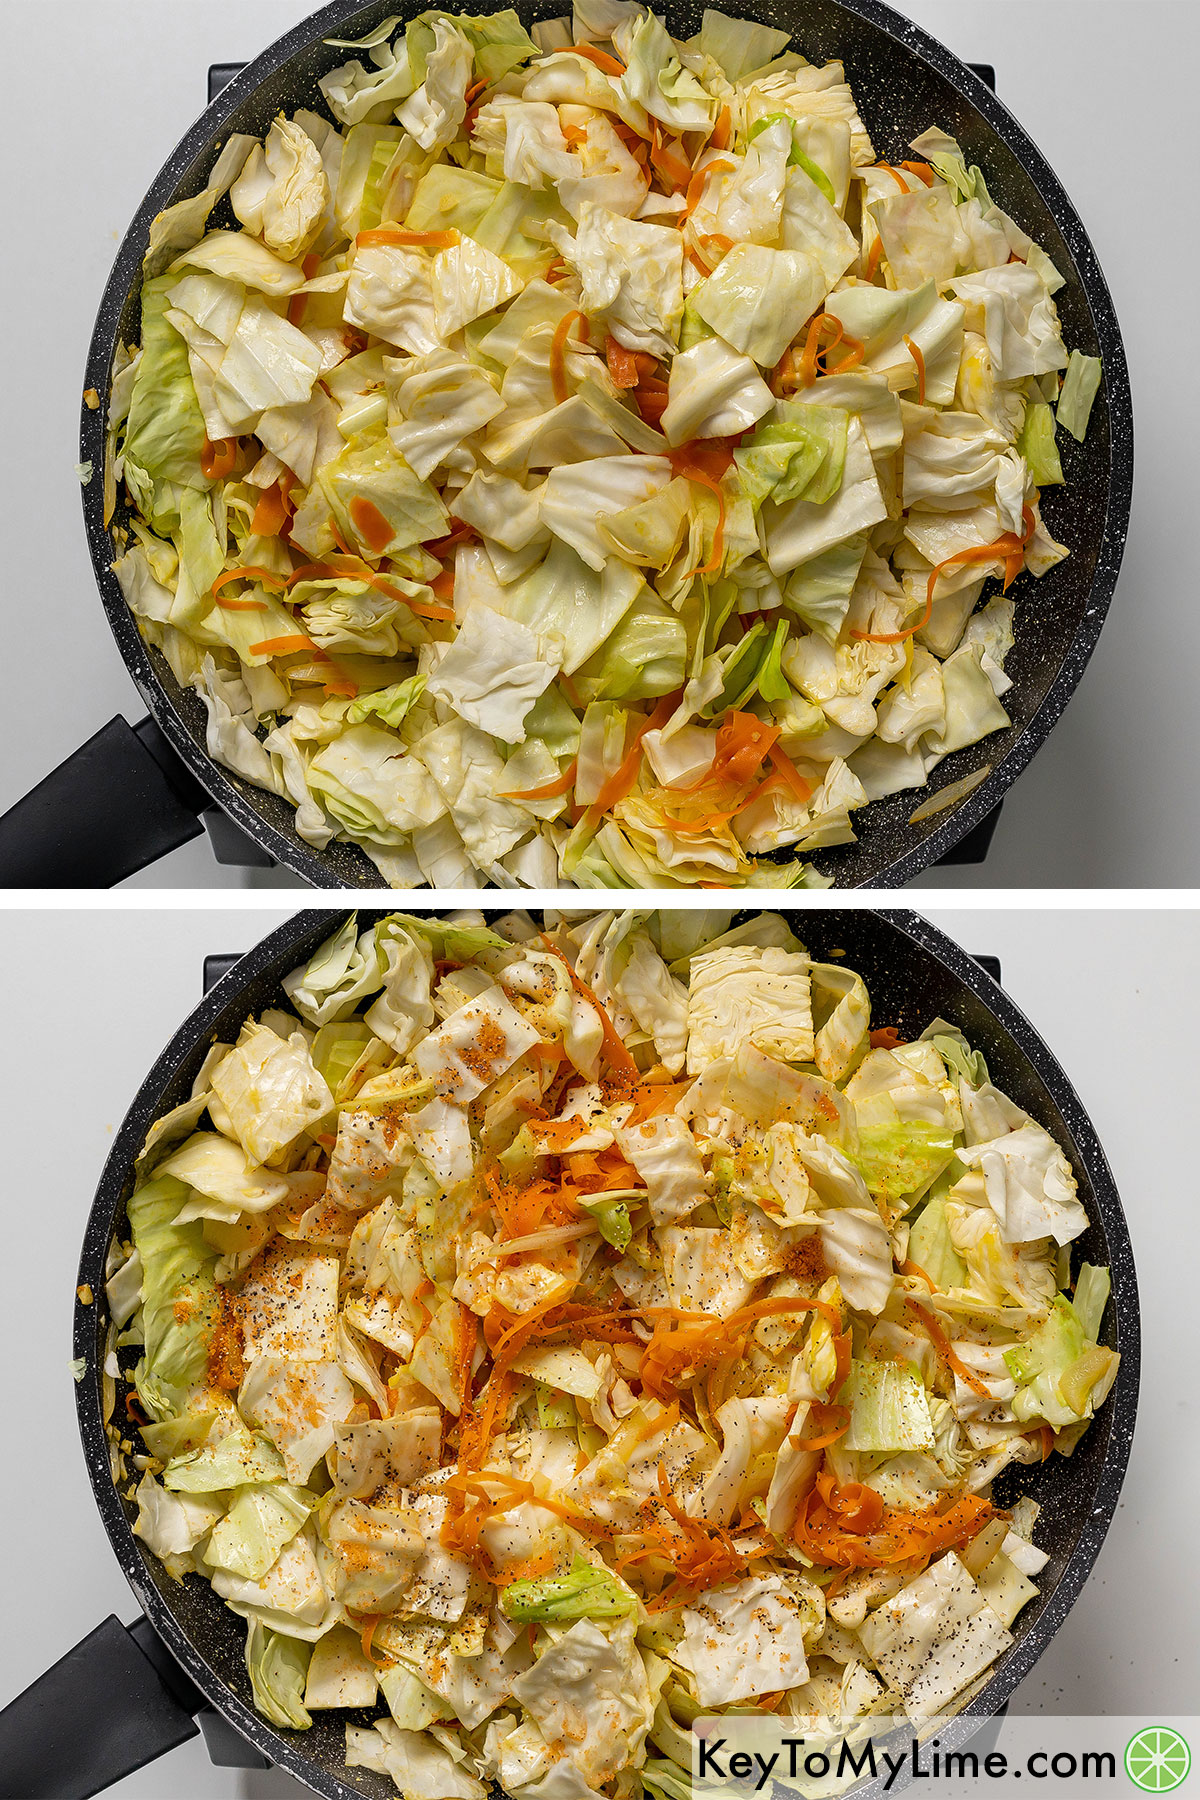 Adding apple cider vinegar, seasoning salt, and pepper, and then mixing the cabbage until fully mixed throughout.